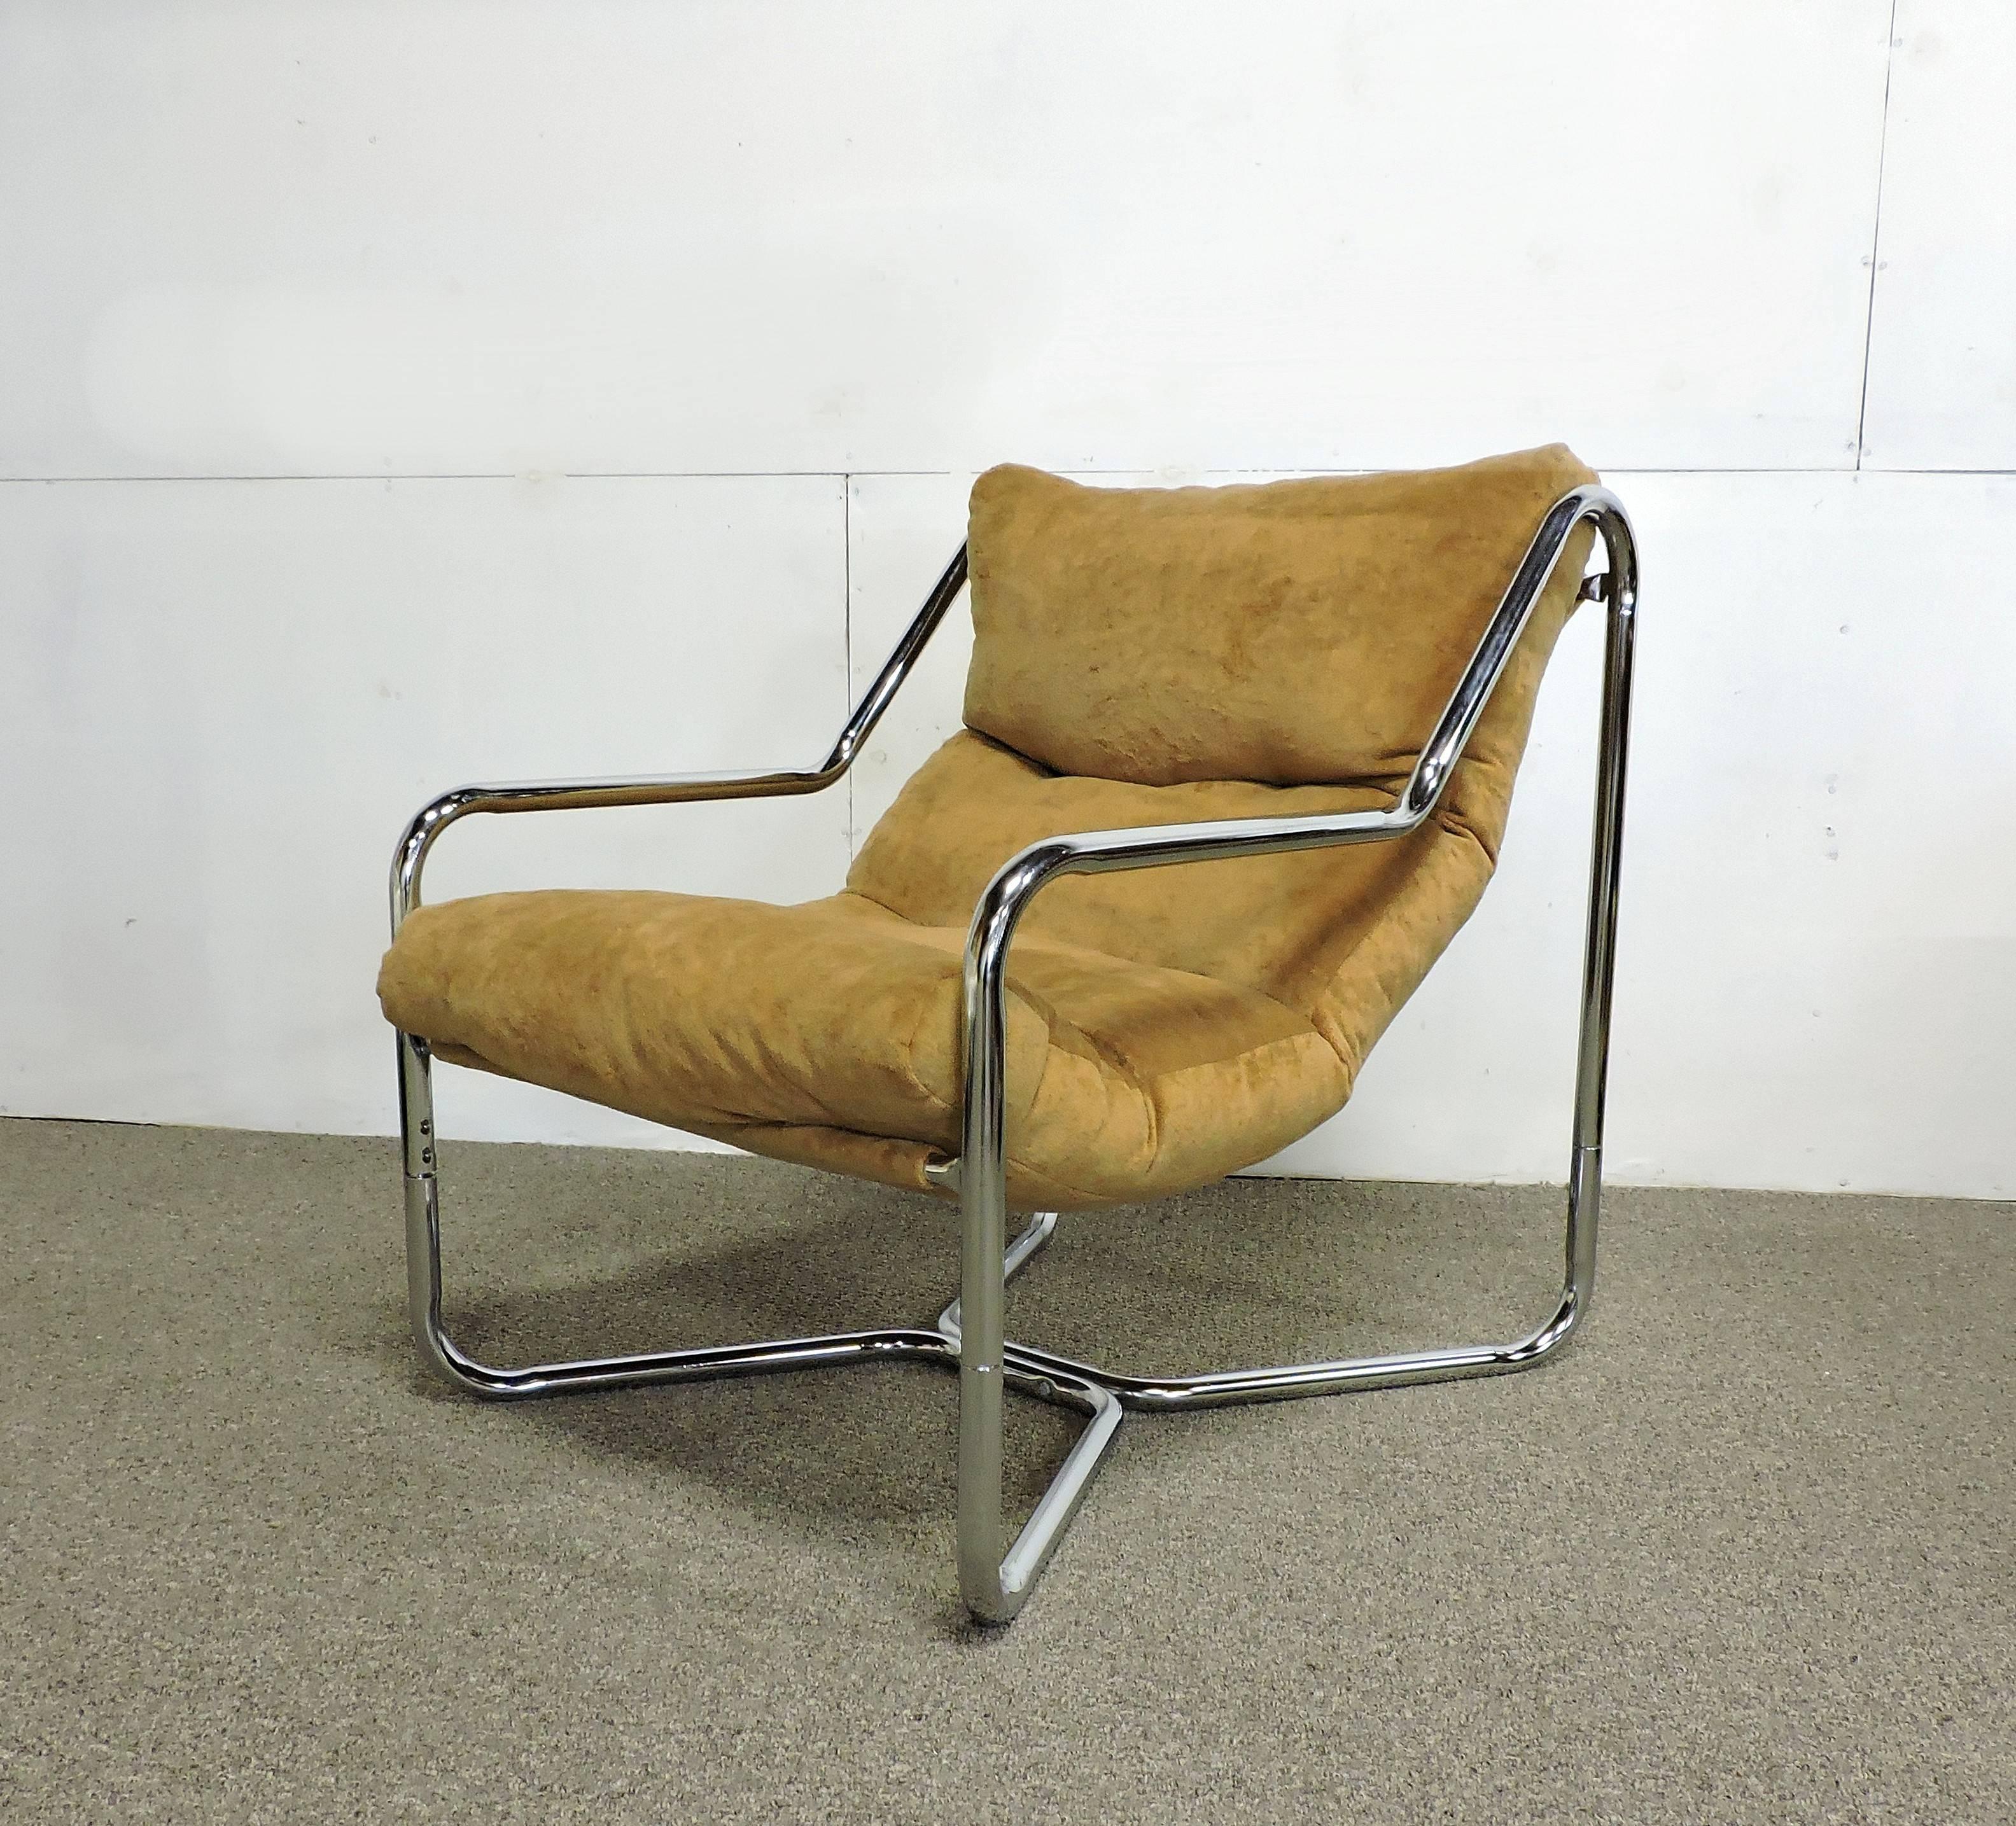 Great looking sling chair from the 1970s. This chair has plush brown tufted upholstery that sits on a tubular chrome frame. Nice size and very comfortable.